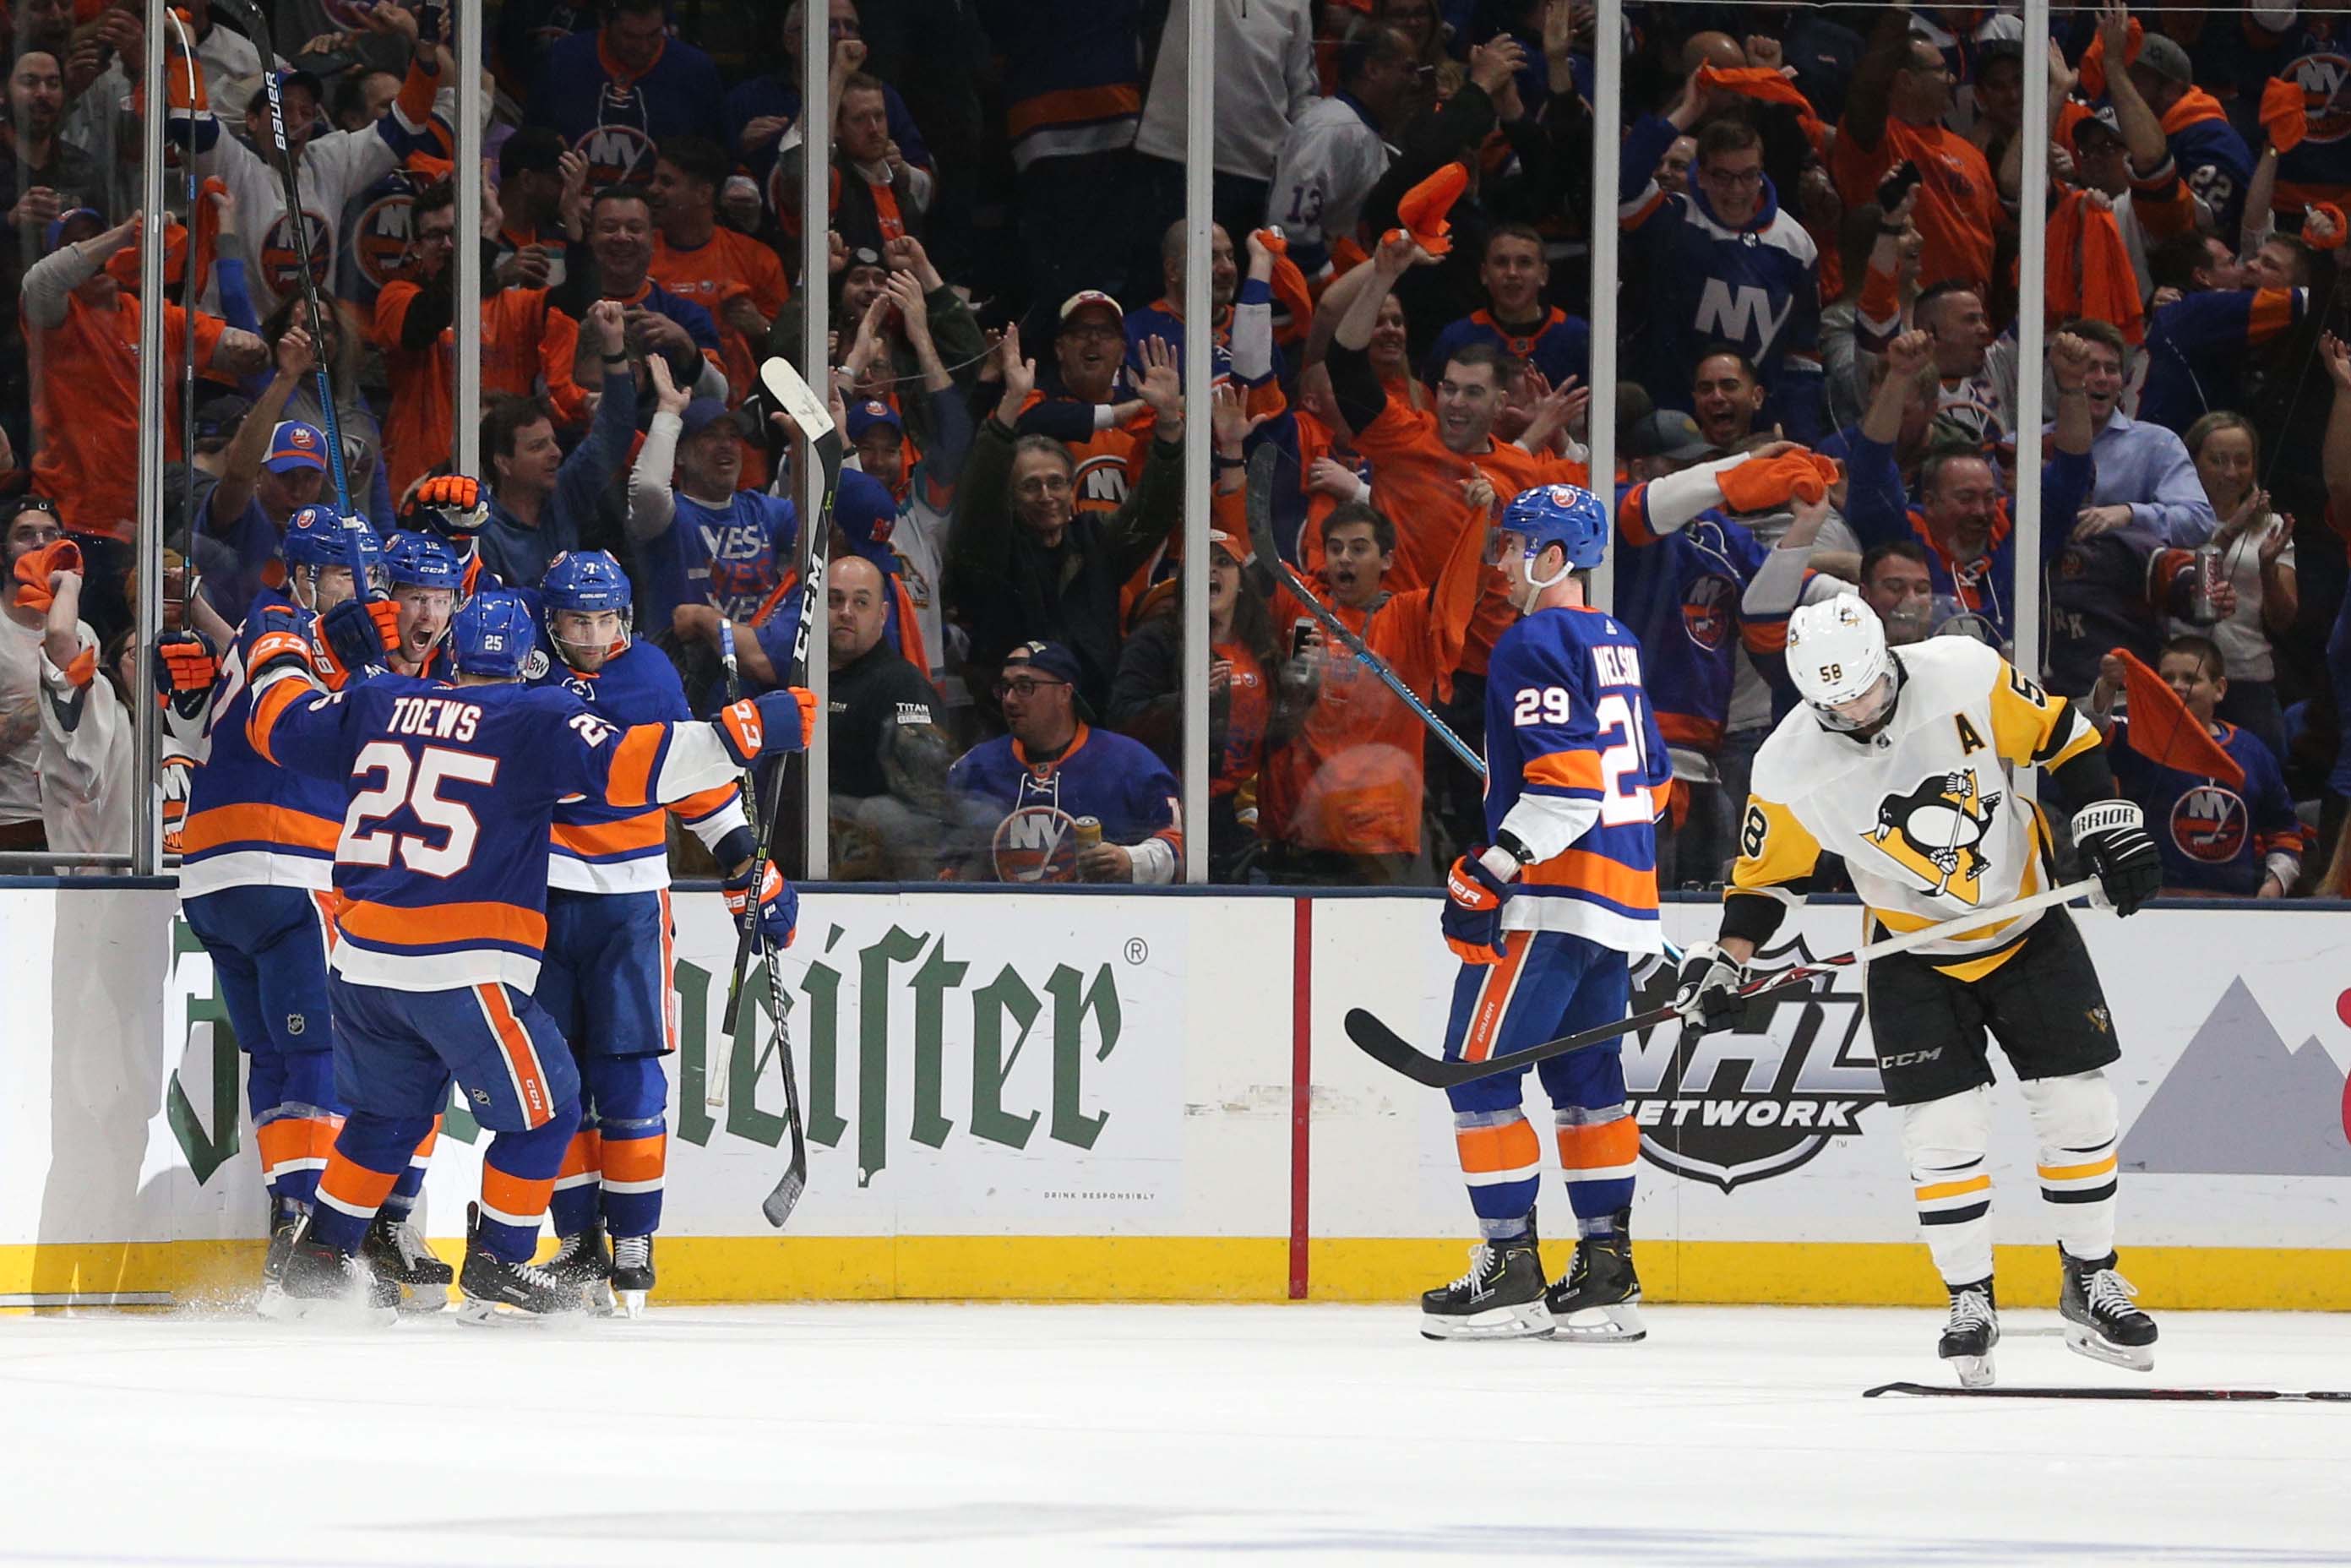 Apr 12, 2019; Uniondale, NY, USA; New York Islanders left wing Josh Bailey (12) celebrates his goal against the Pittsburgh Penguins with teammates during the third period of game two of the first round of the 2019 Stanley Cup Playoffs at Nassau Veterans Memorial Coliseum. Mandatory Credit: Brad Penner-USA TODAY Sports